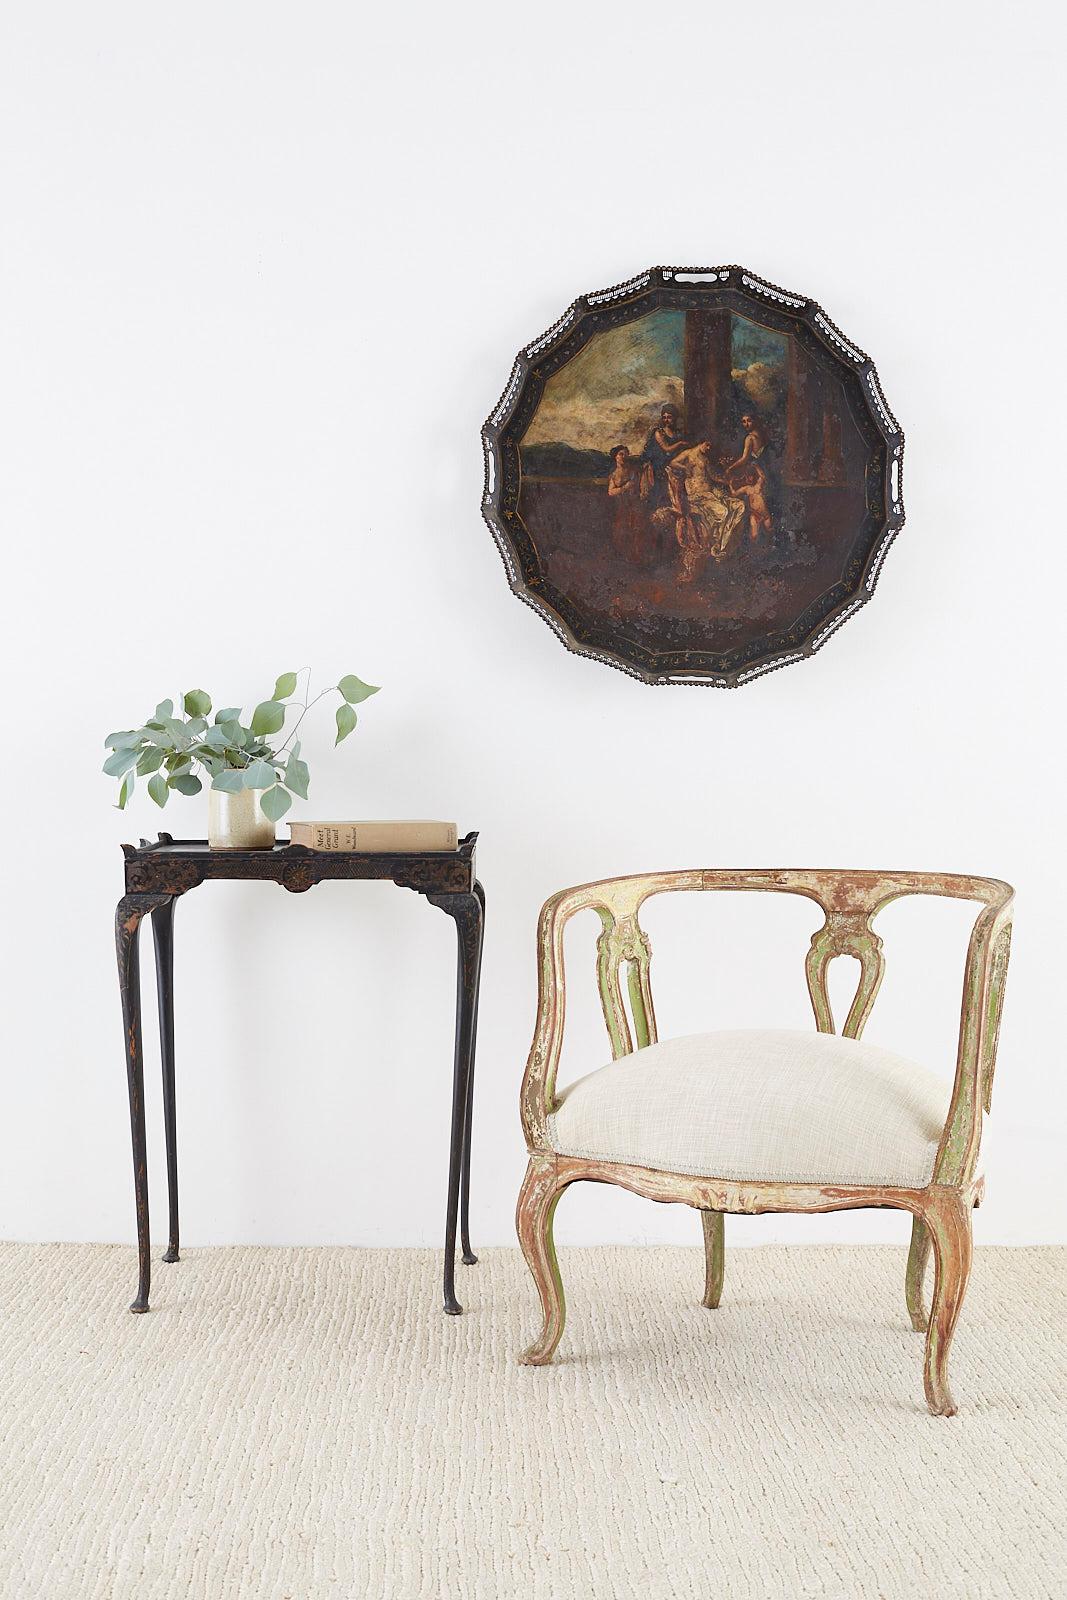 Distinctive 19th century Italian Venetian salon armchair featuring a round barrel form made in the Rococo taste. Beautifully carved ribbon frame with old lacquer remnants in a celadon color. Excellent joinery and craftsmanship with a distressed